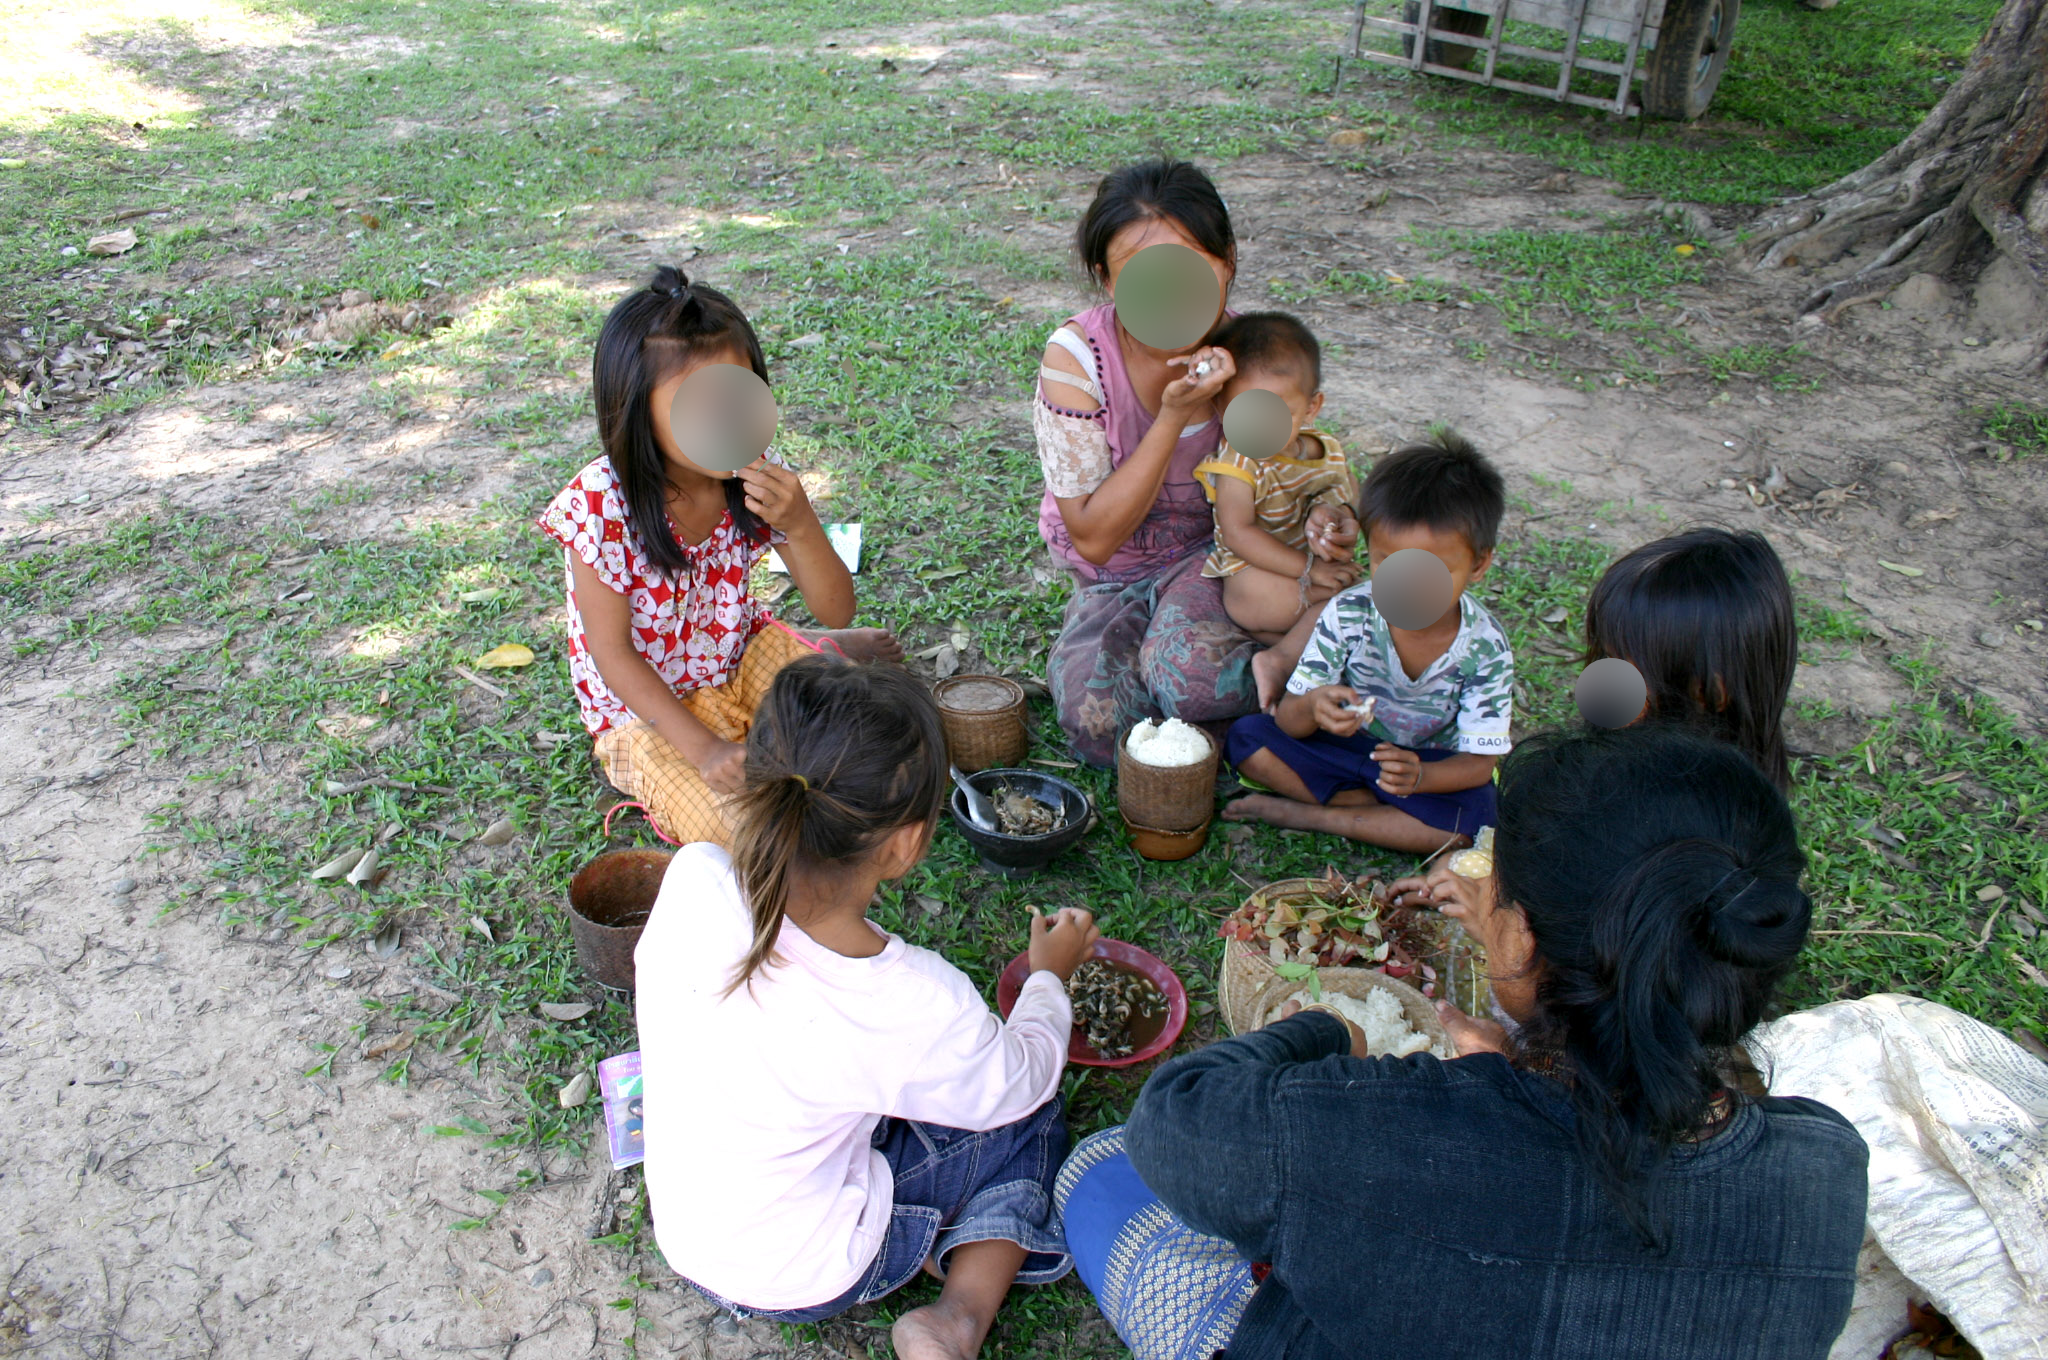 Family sitting on the ground communally eating.